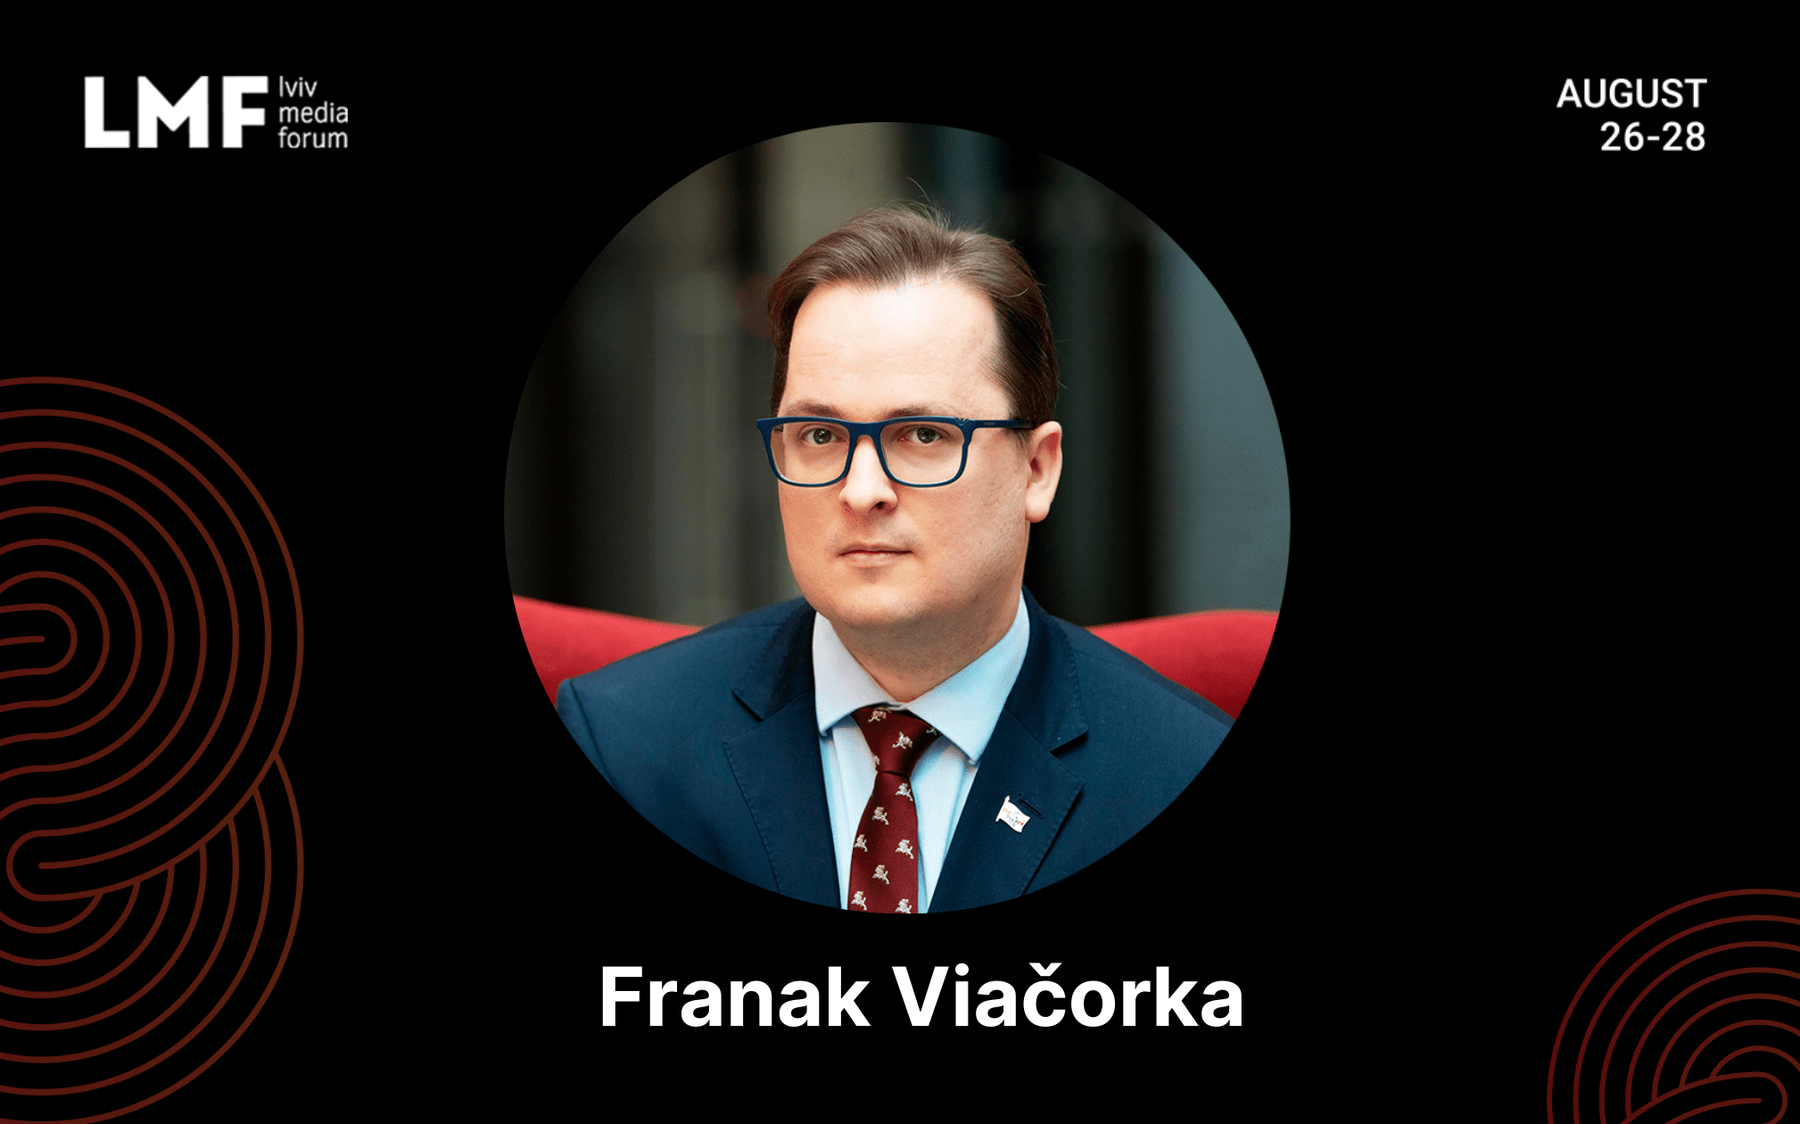 LMF 2021 announced the first special guest: Franak Viačorka - media expert from Belarus